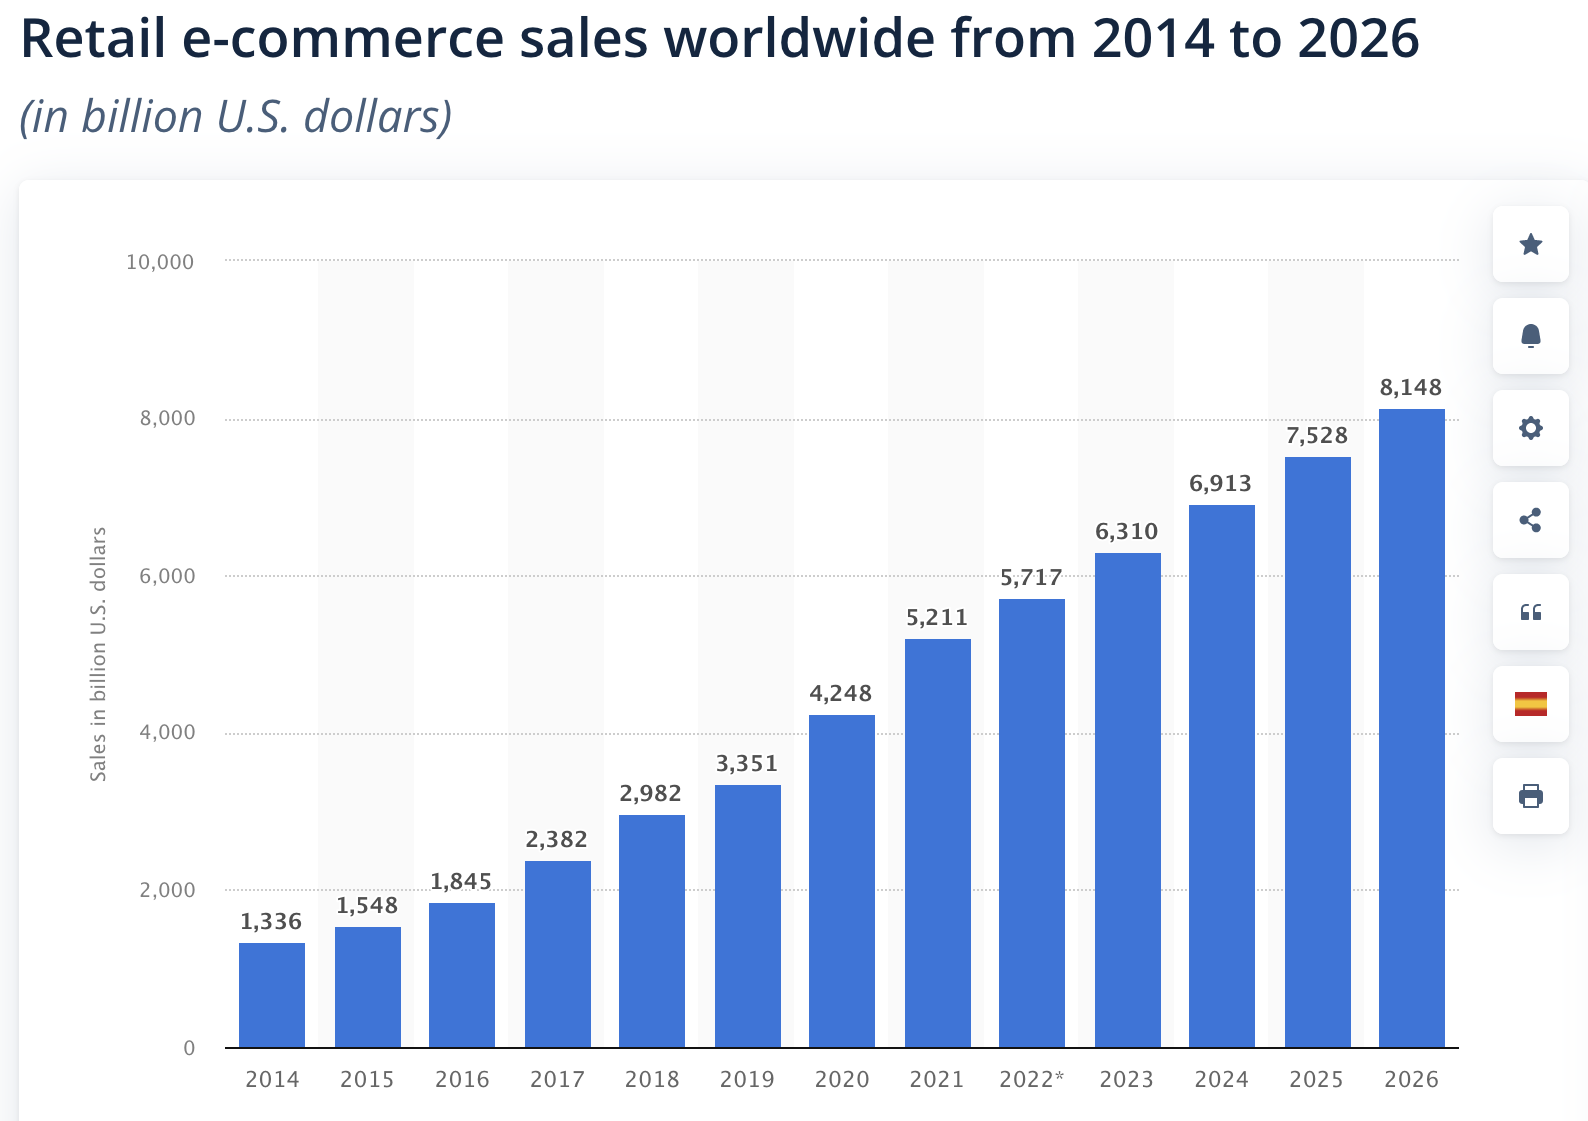 Ecommerce is a booming industry. The future is bright!